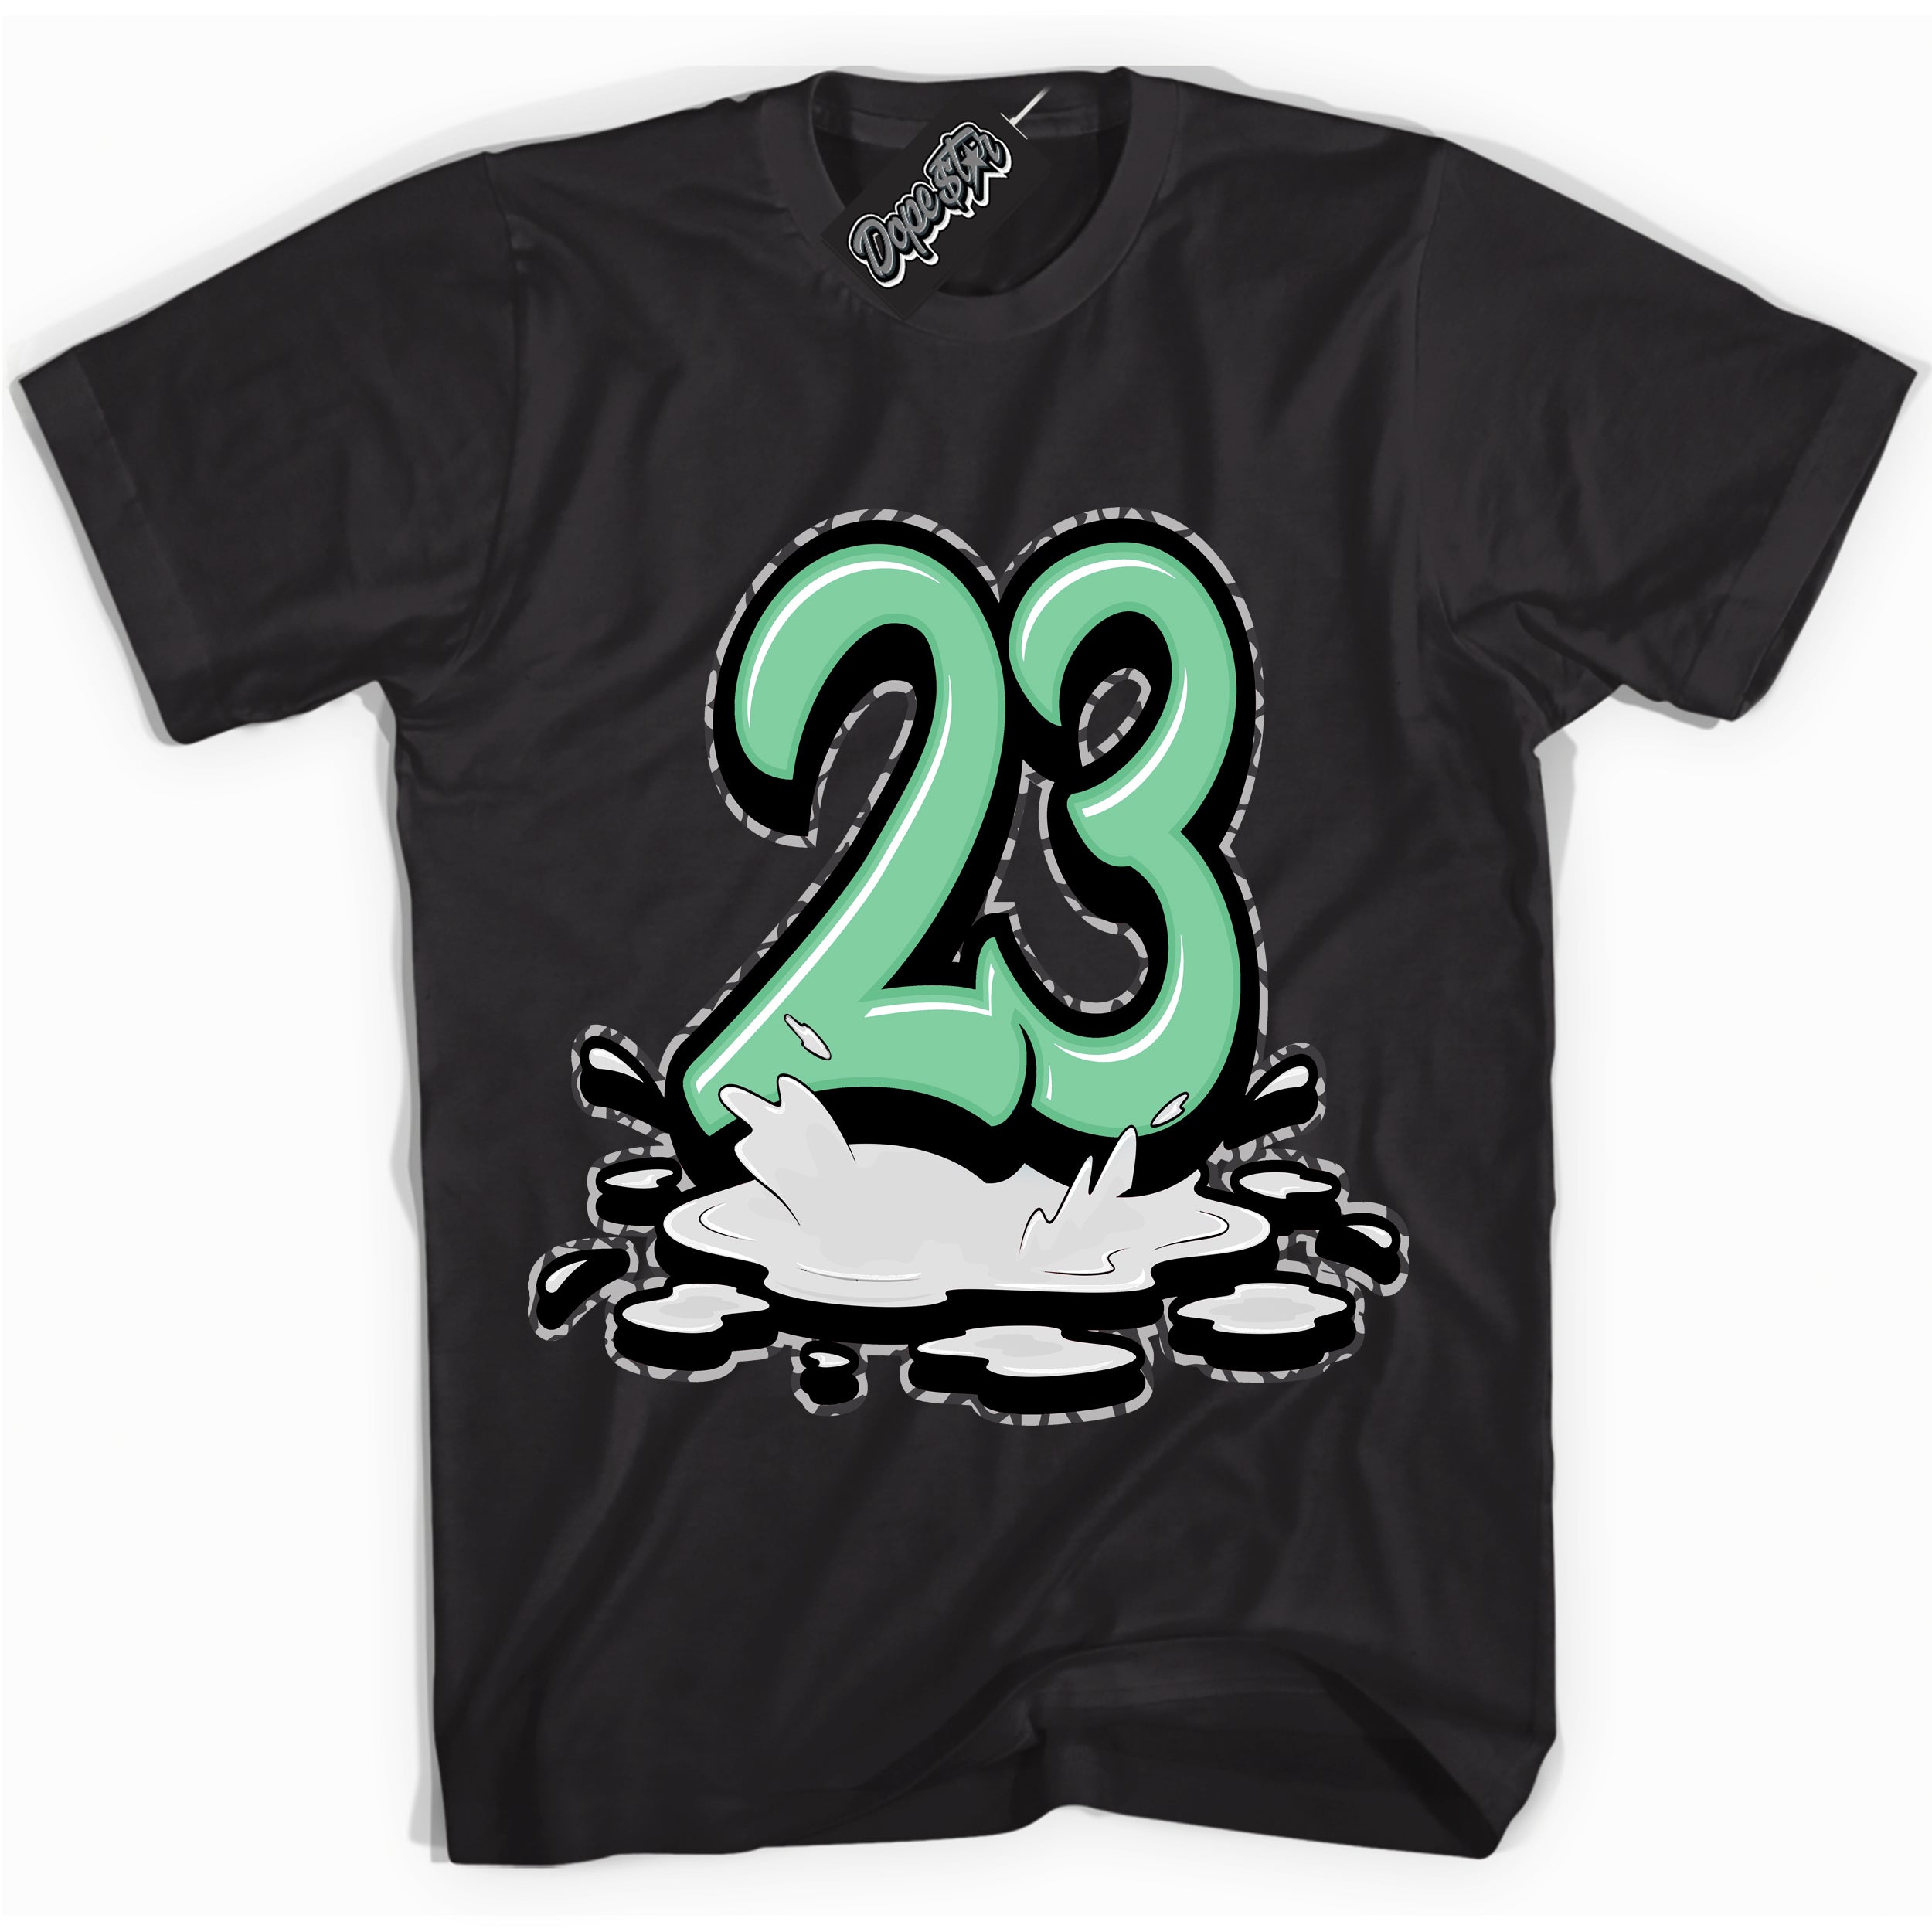 Cool Black graphic tee with “ 23 Melting ” design, that perfectly matches Green Glow 3s sneakers 